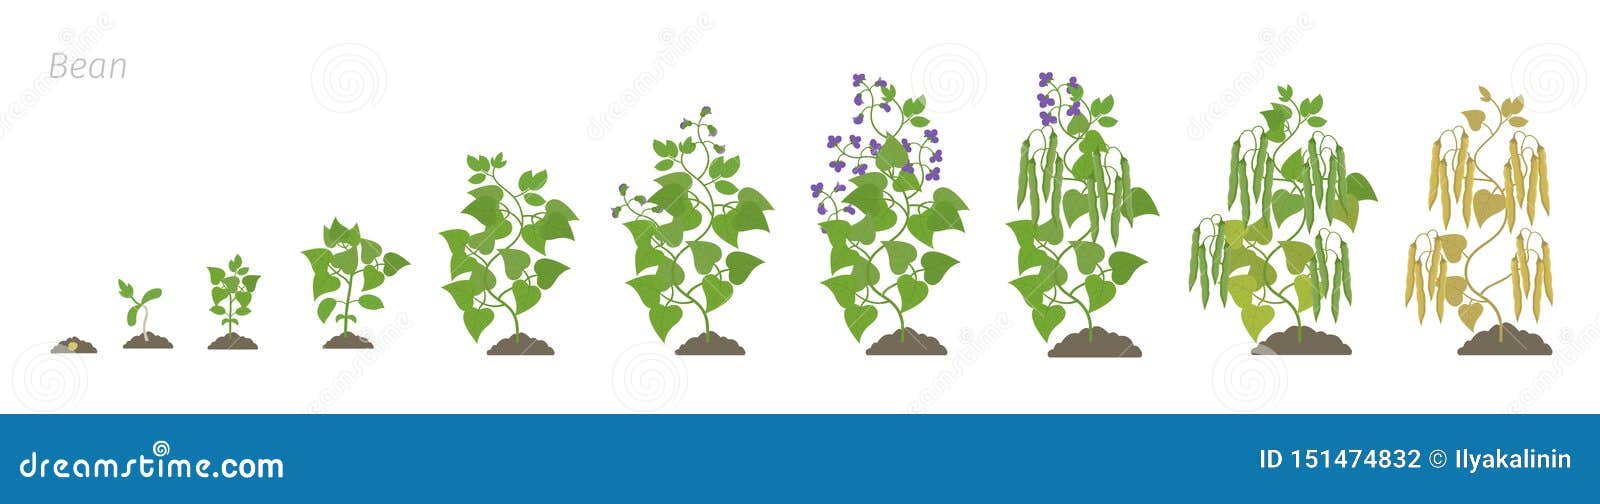 Growth Stages of Bean Plant. Bean Family Fabaceae Phases Set Ripening  Period. Life Cycle, Animation Progression. Stock Vector - Illustration of  grade, cycle: 151474832